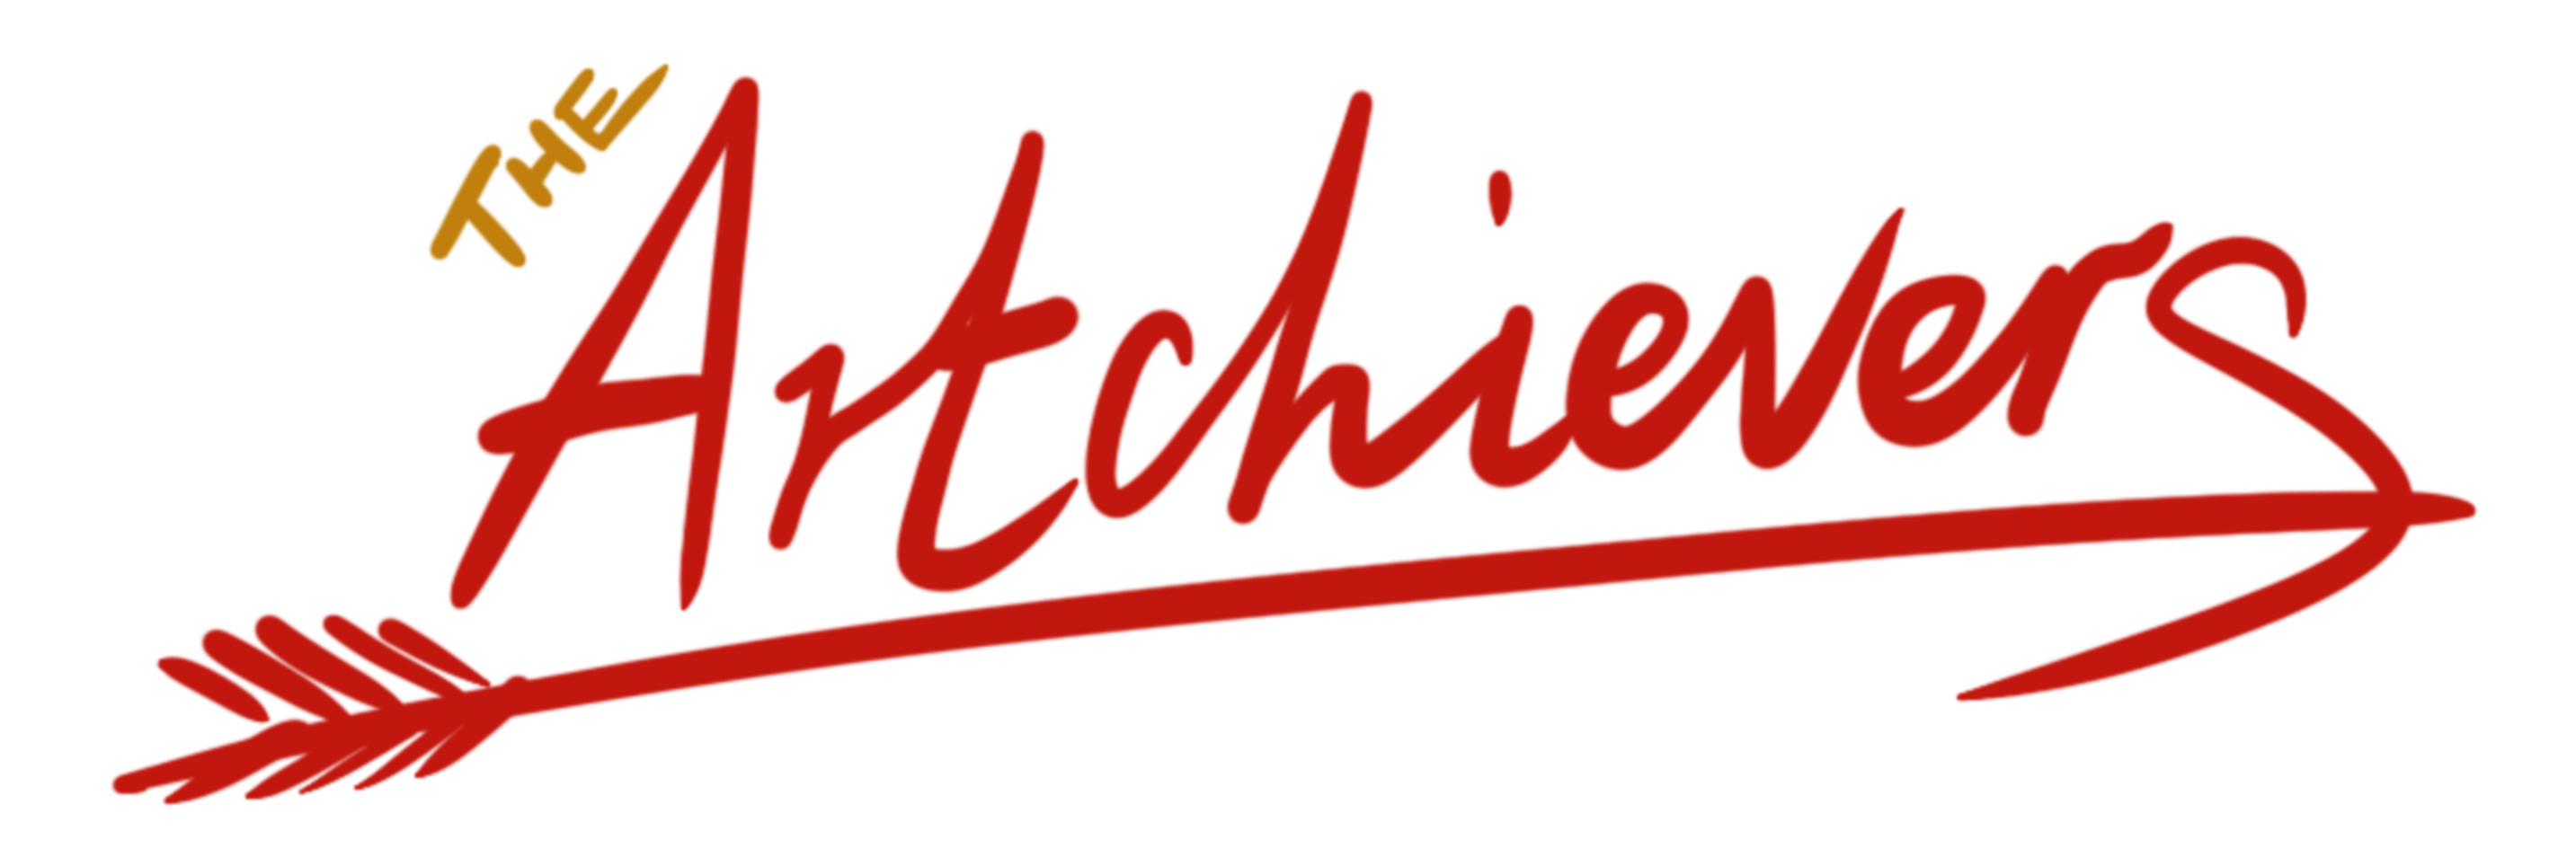 The Artchievers